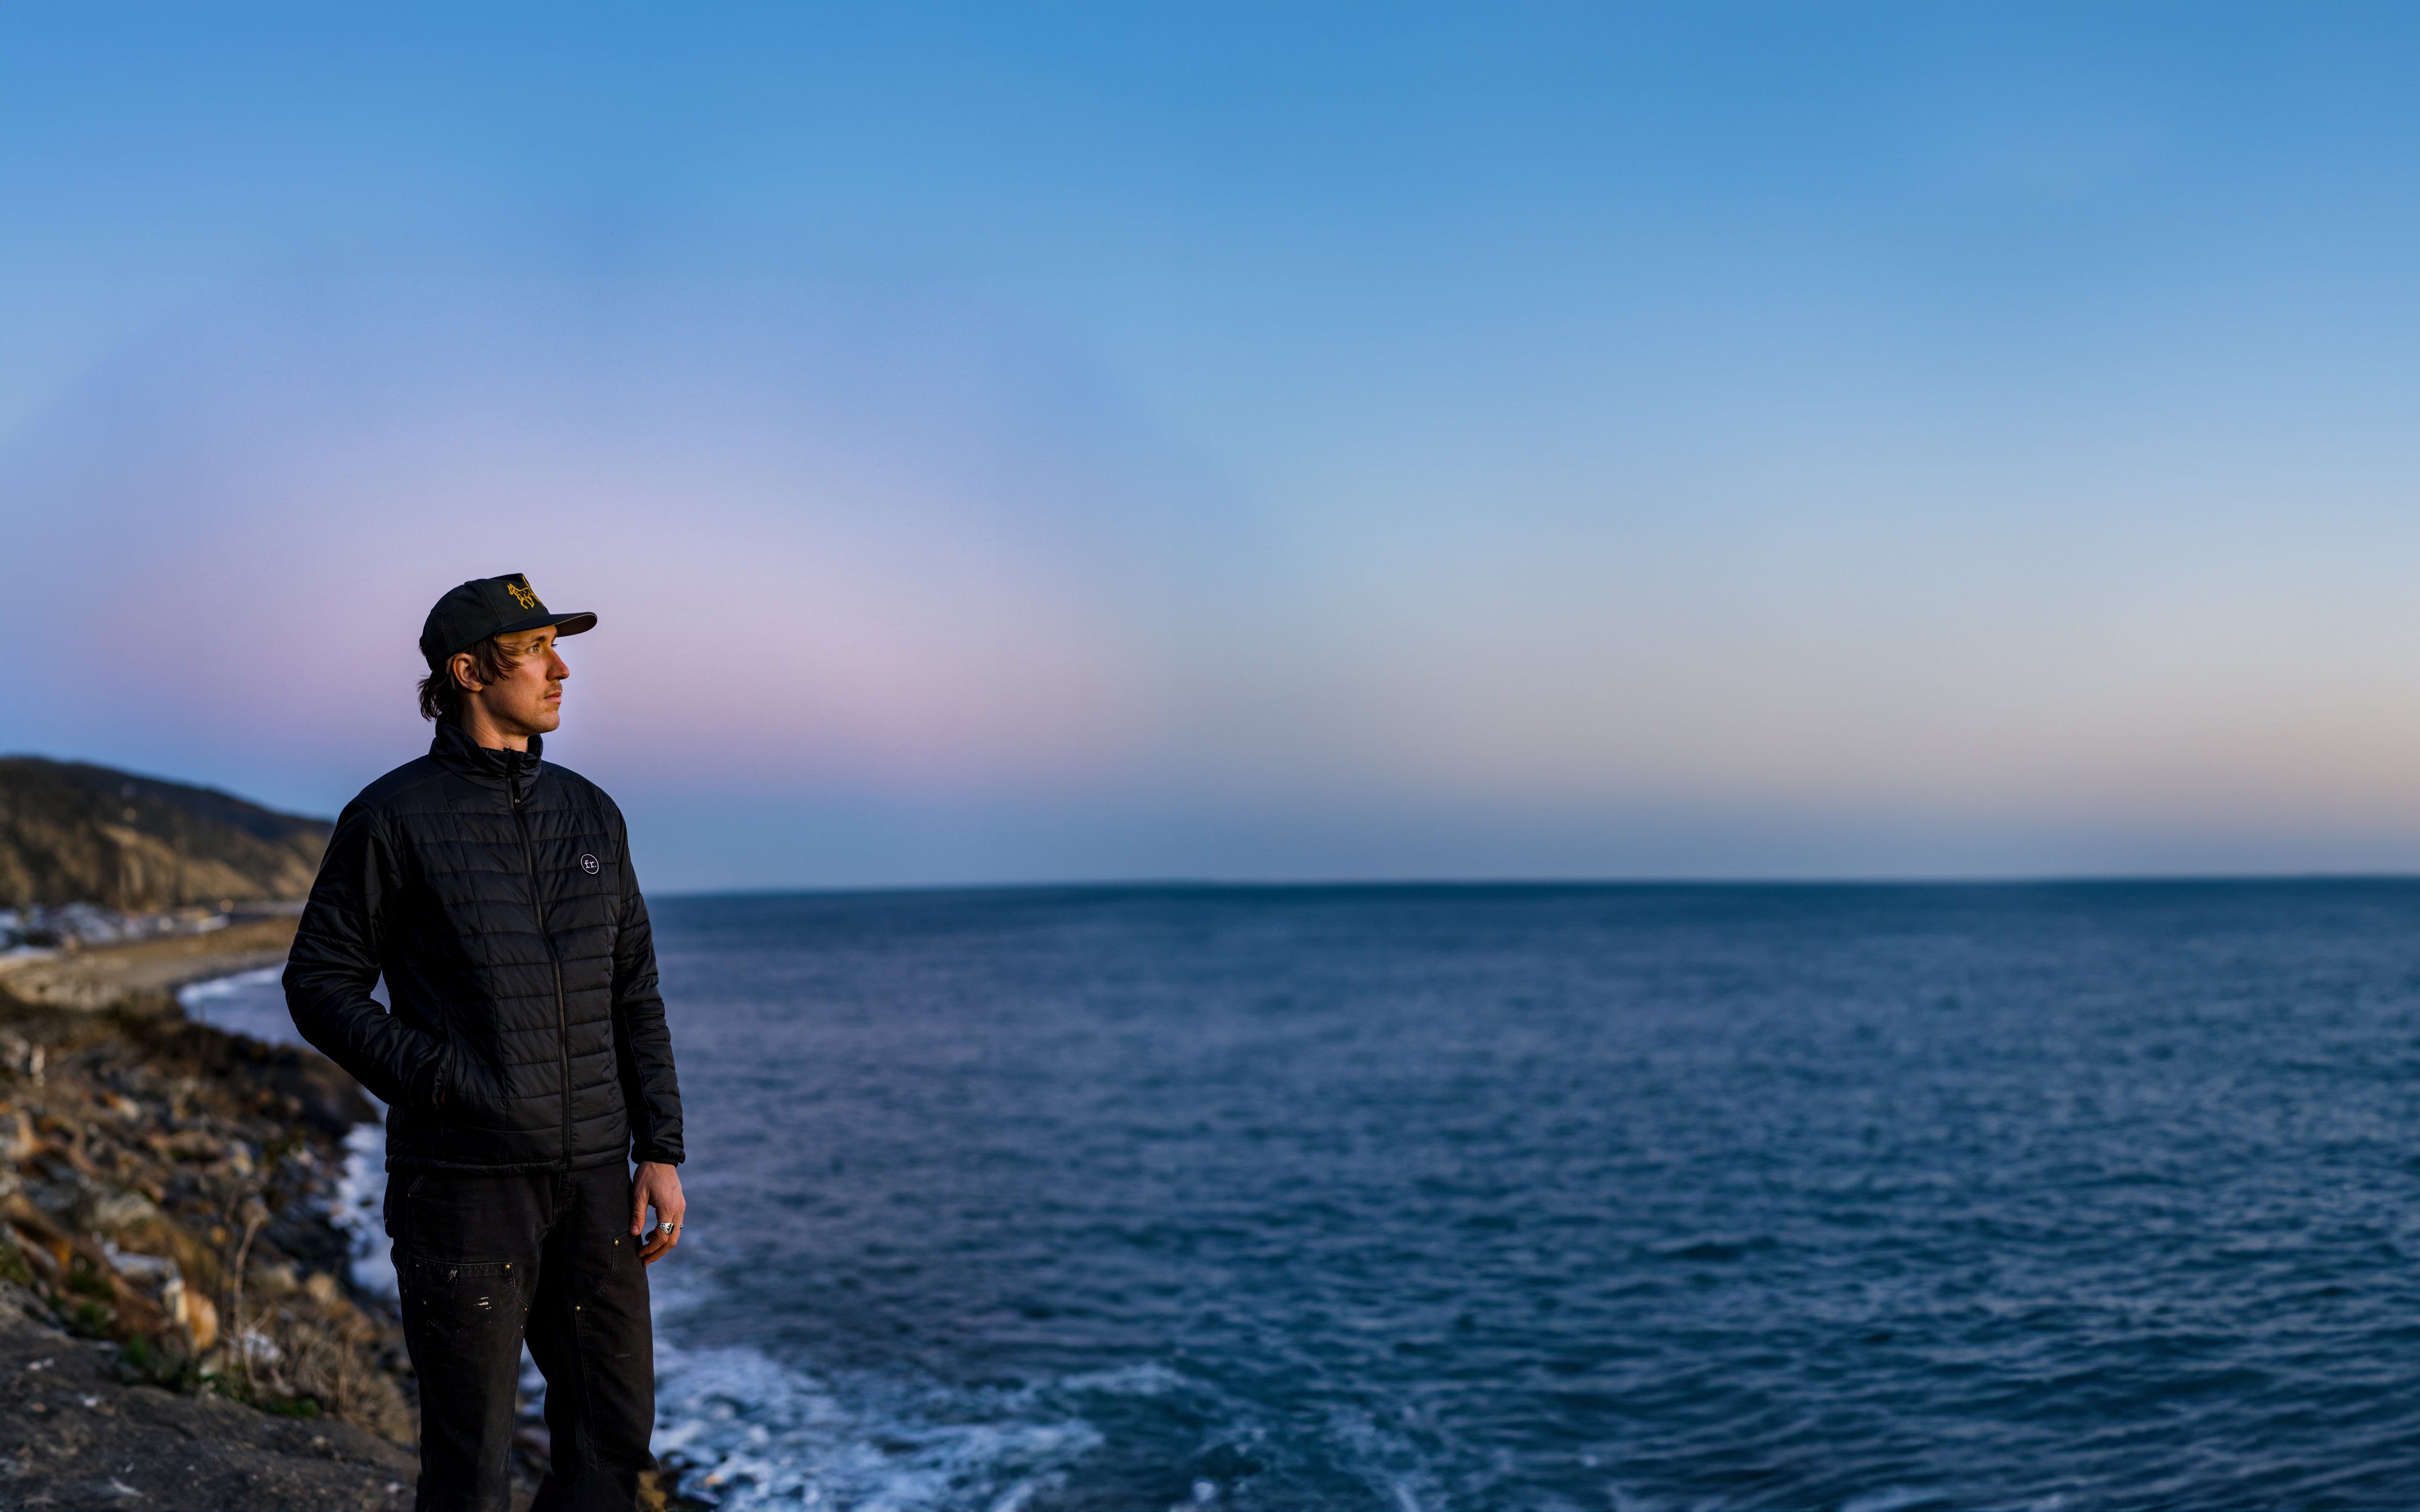 Man on the edge of a cliff during sunset looking out at the pacific ocean wearing Foreign Rider clothing